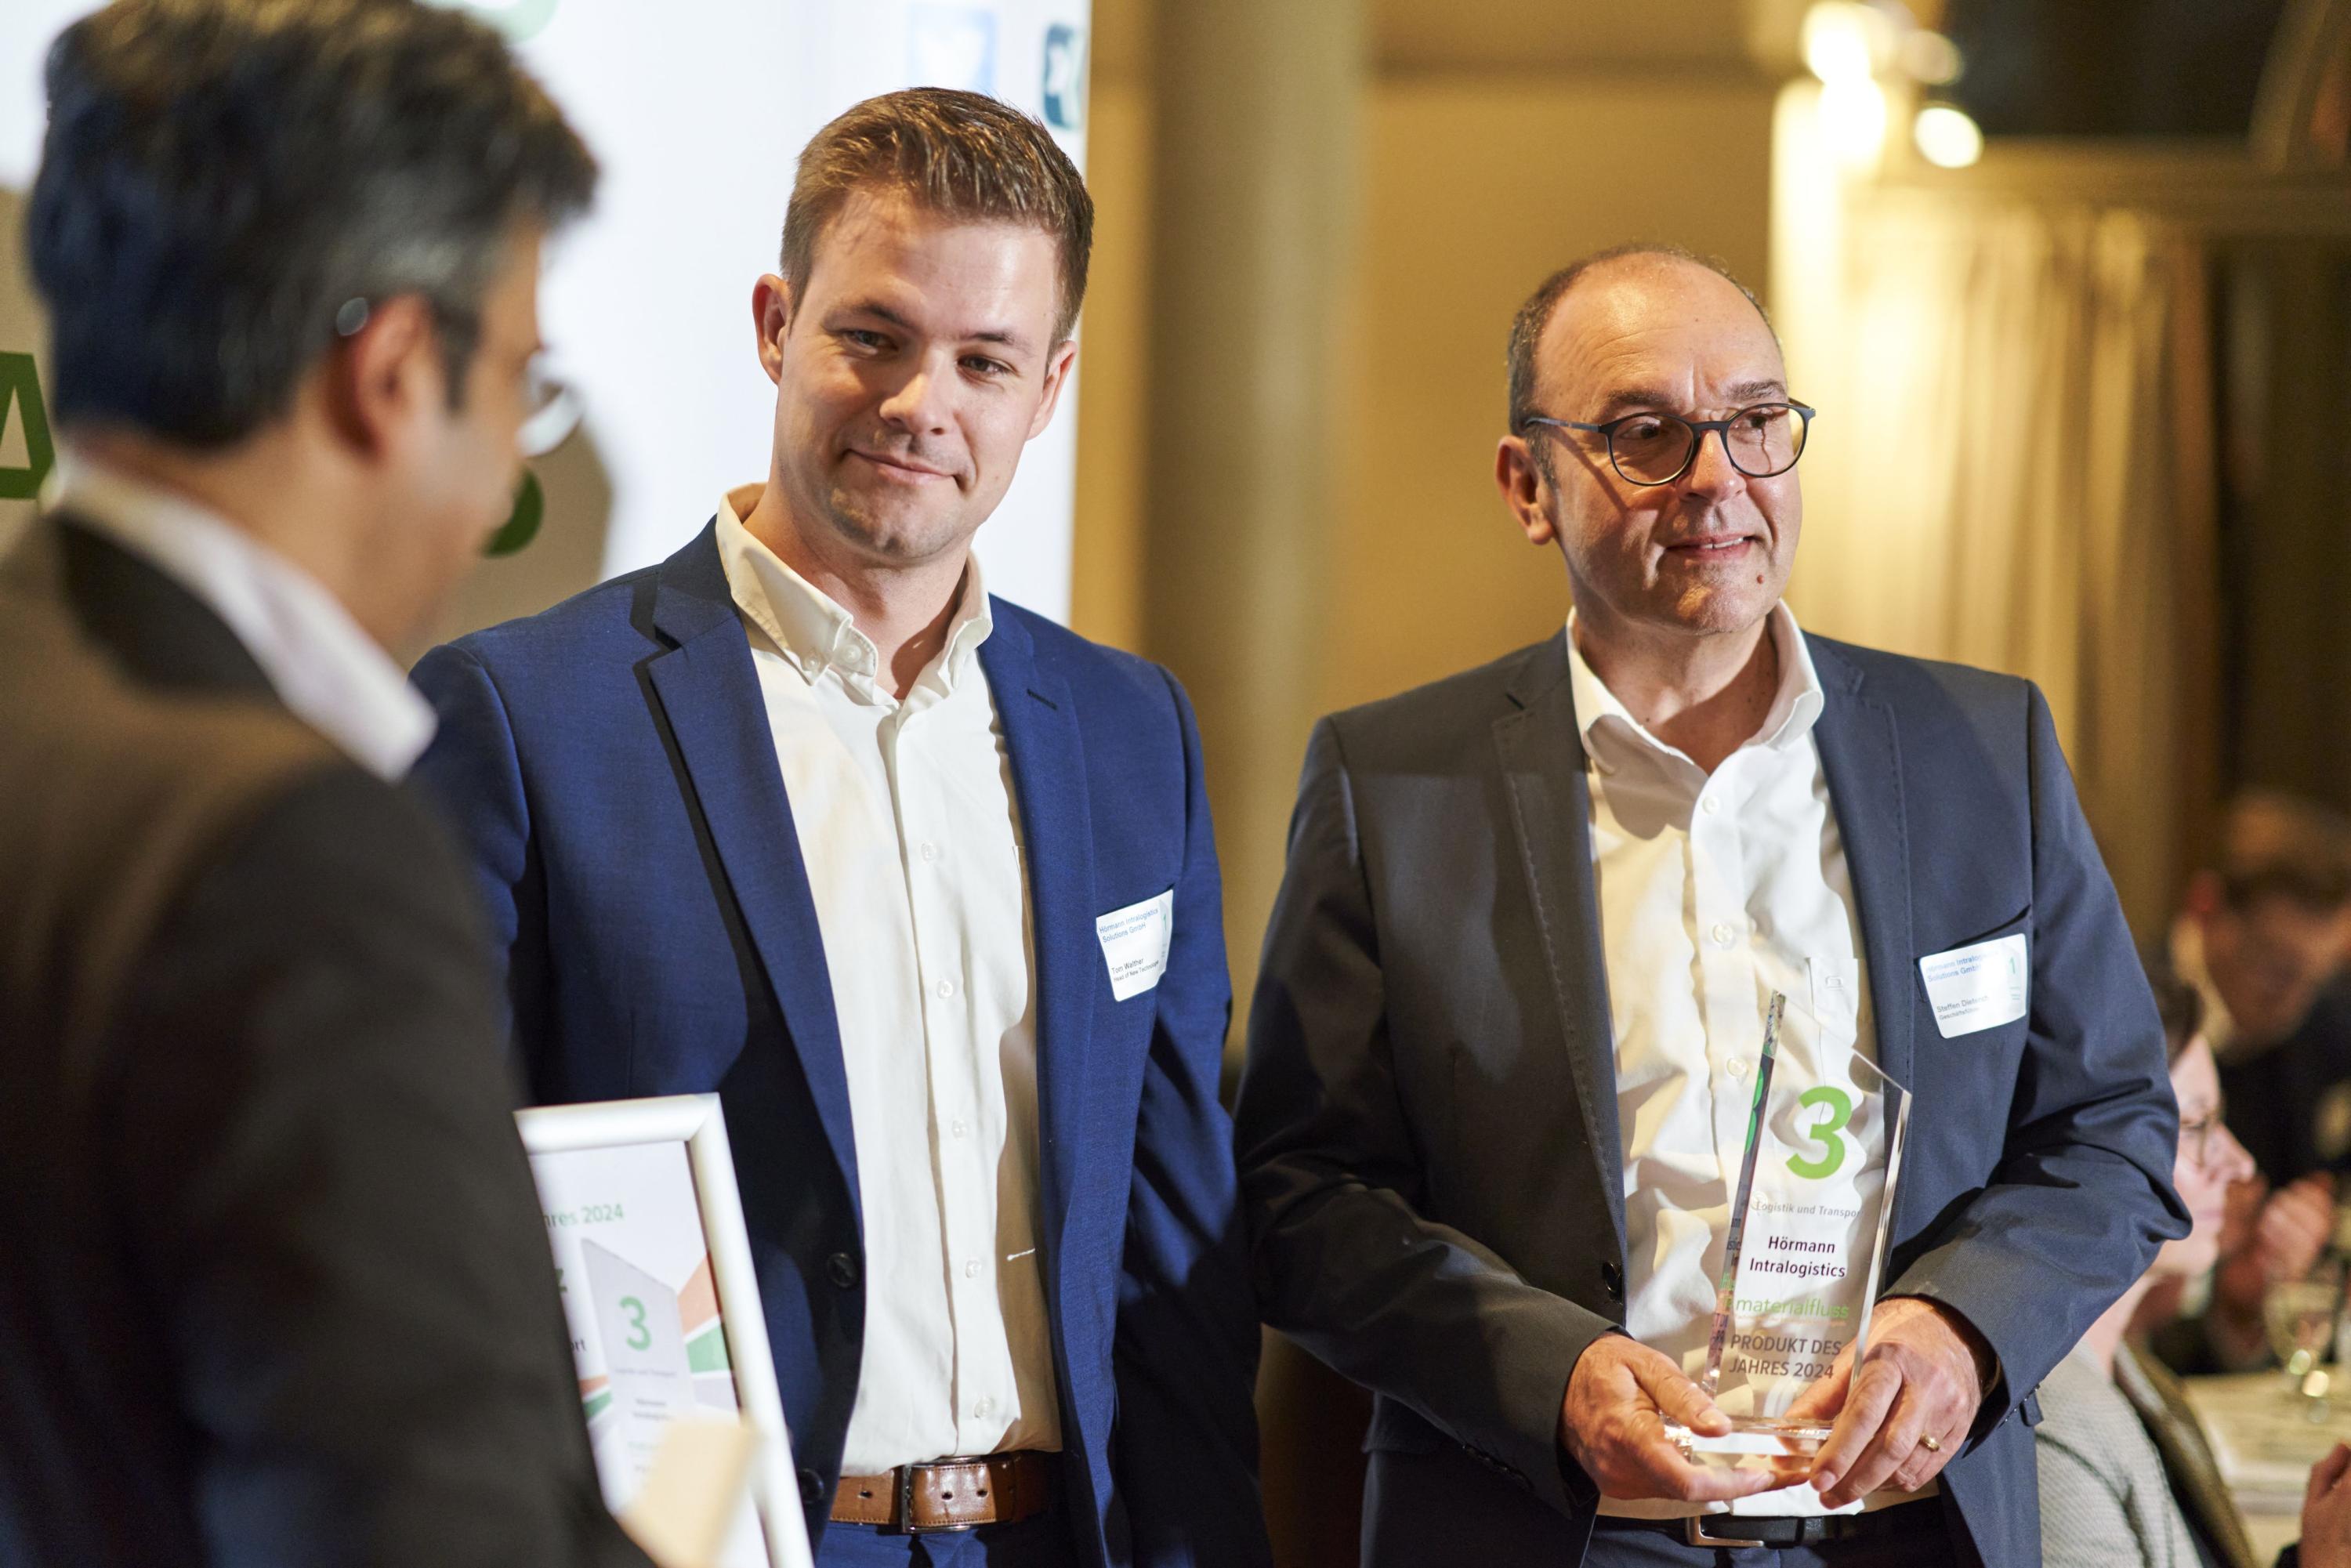 Materialfluss Magazin of the Year 2024 Award ceremony - Tom Walter and Steffen Dieterich